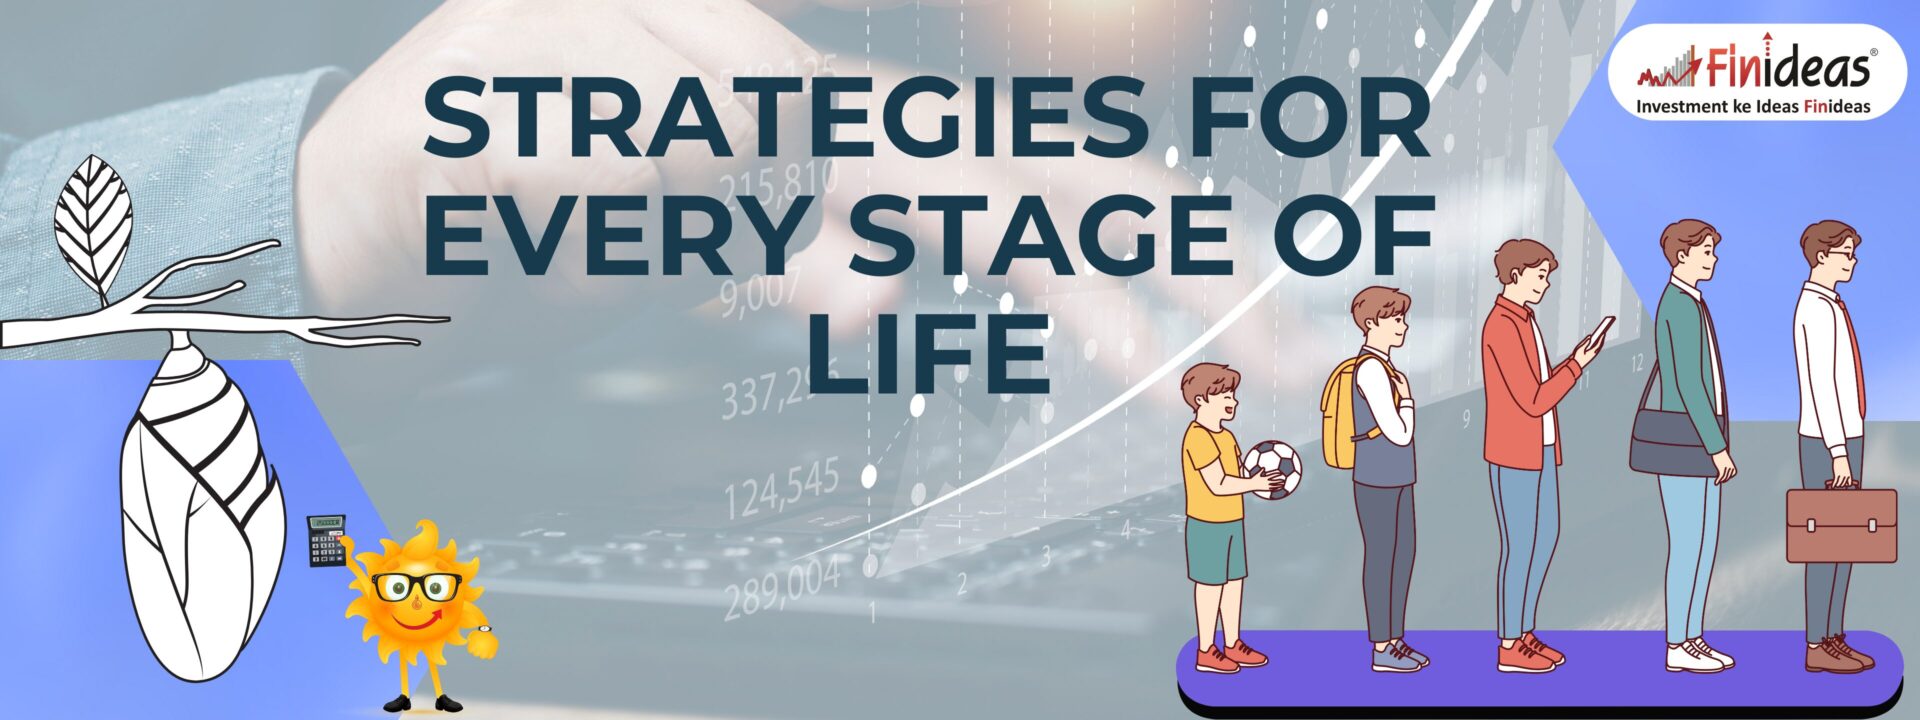 Building Wealth Strategies for Every Stage of Life